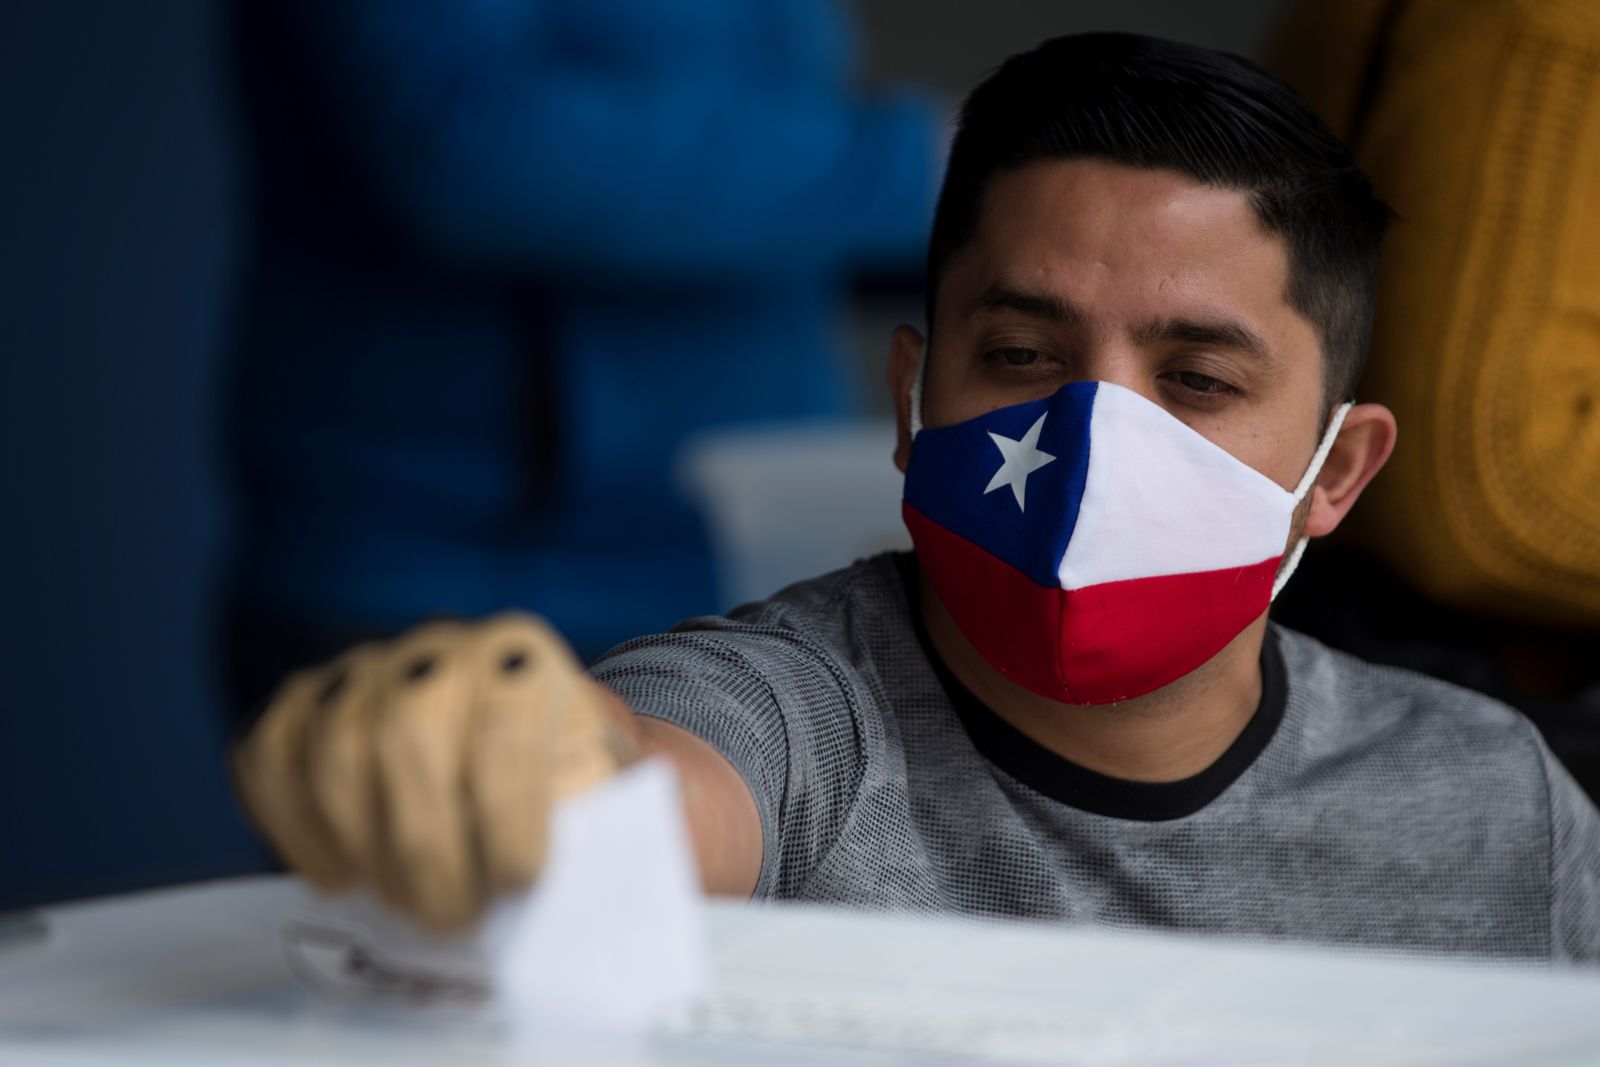 Chile’s constitutional moment is an opportunity to enhance social rights